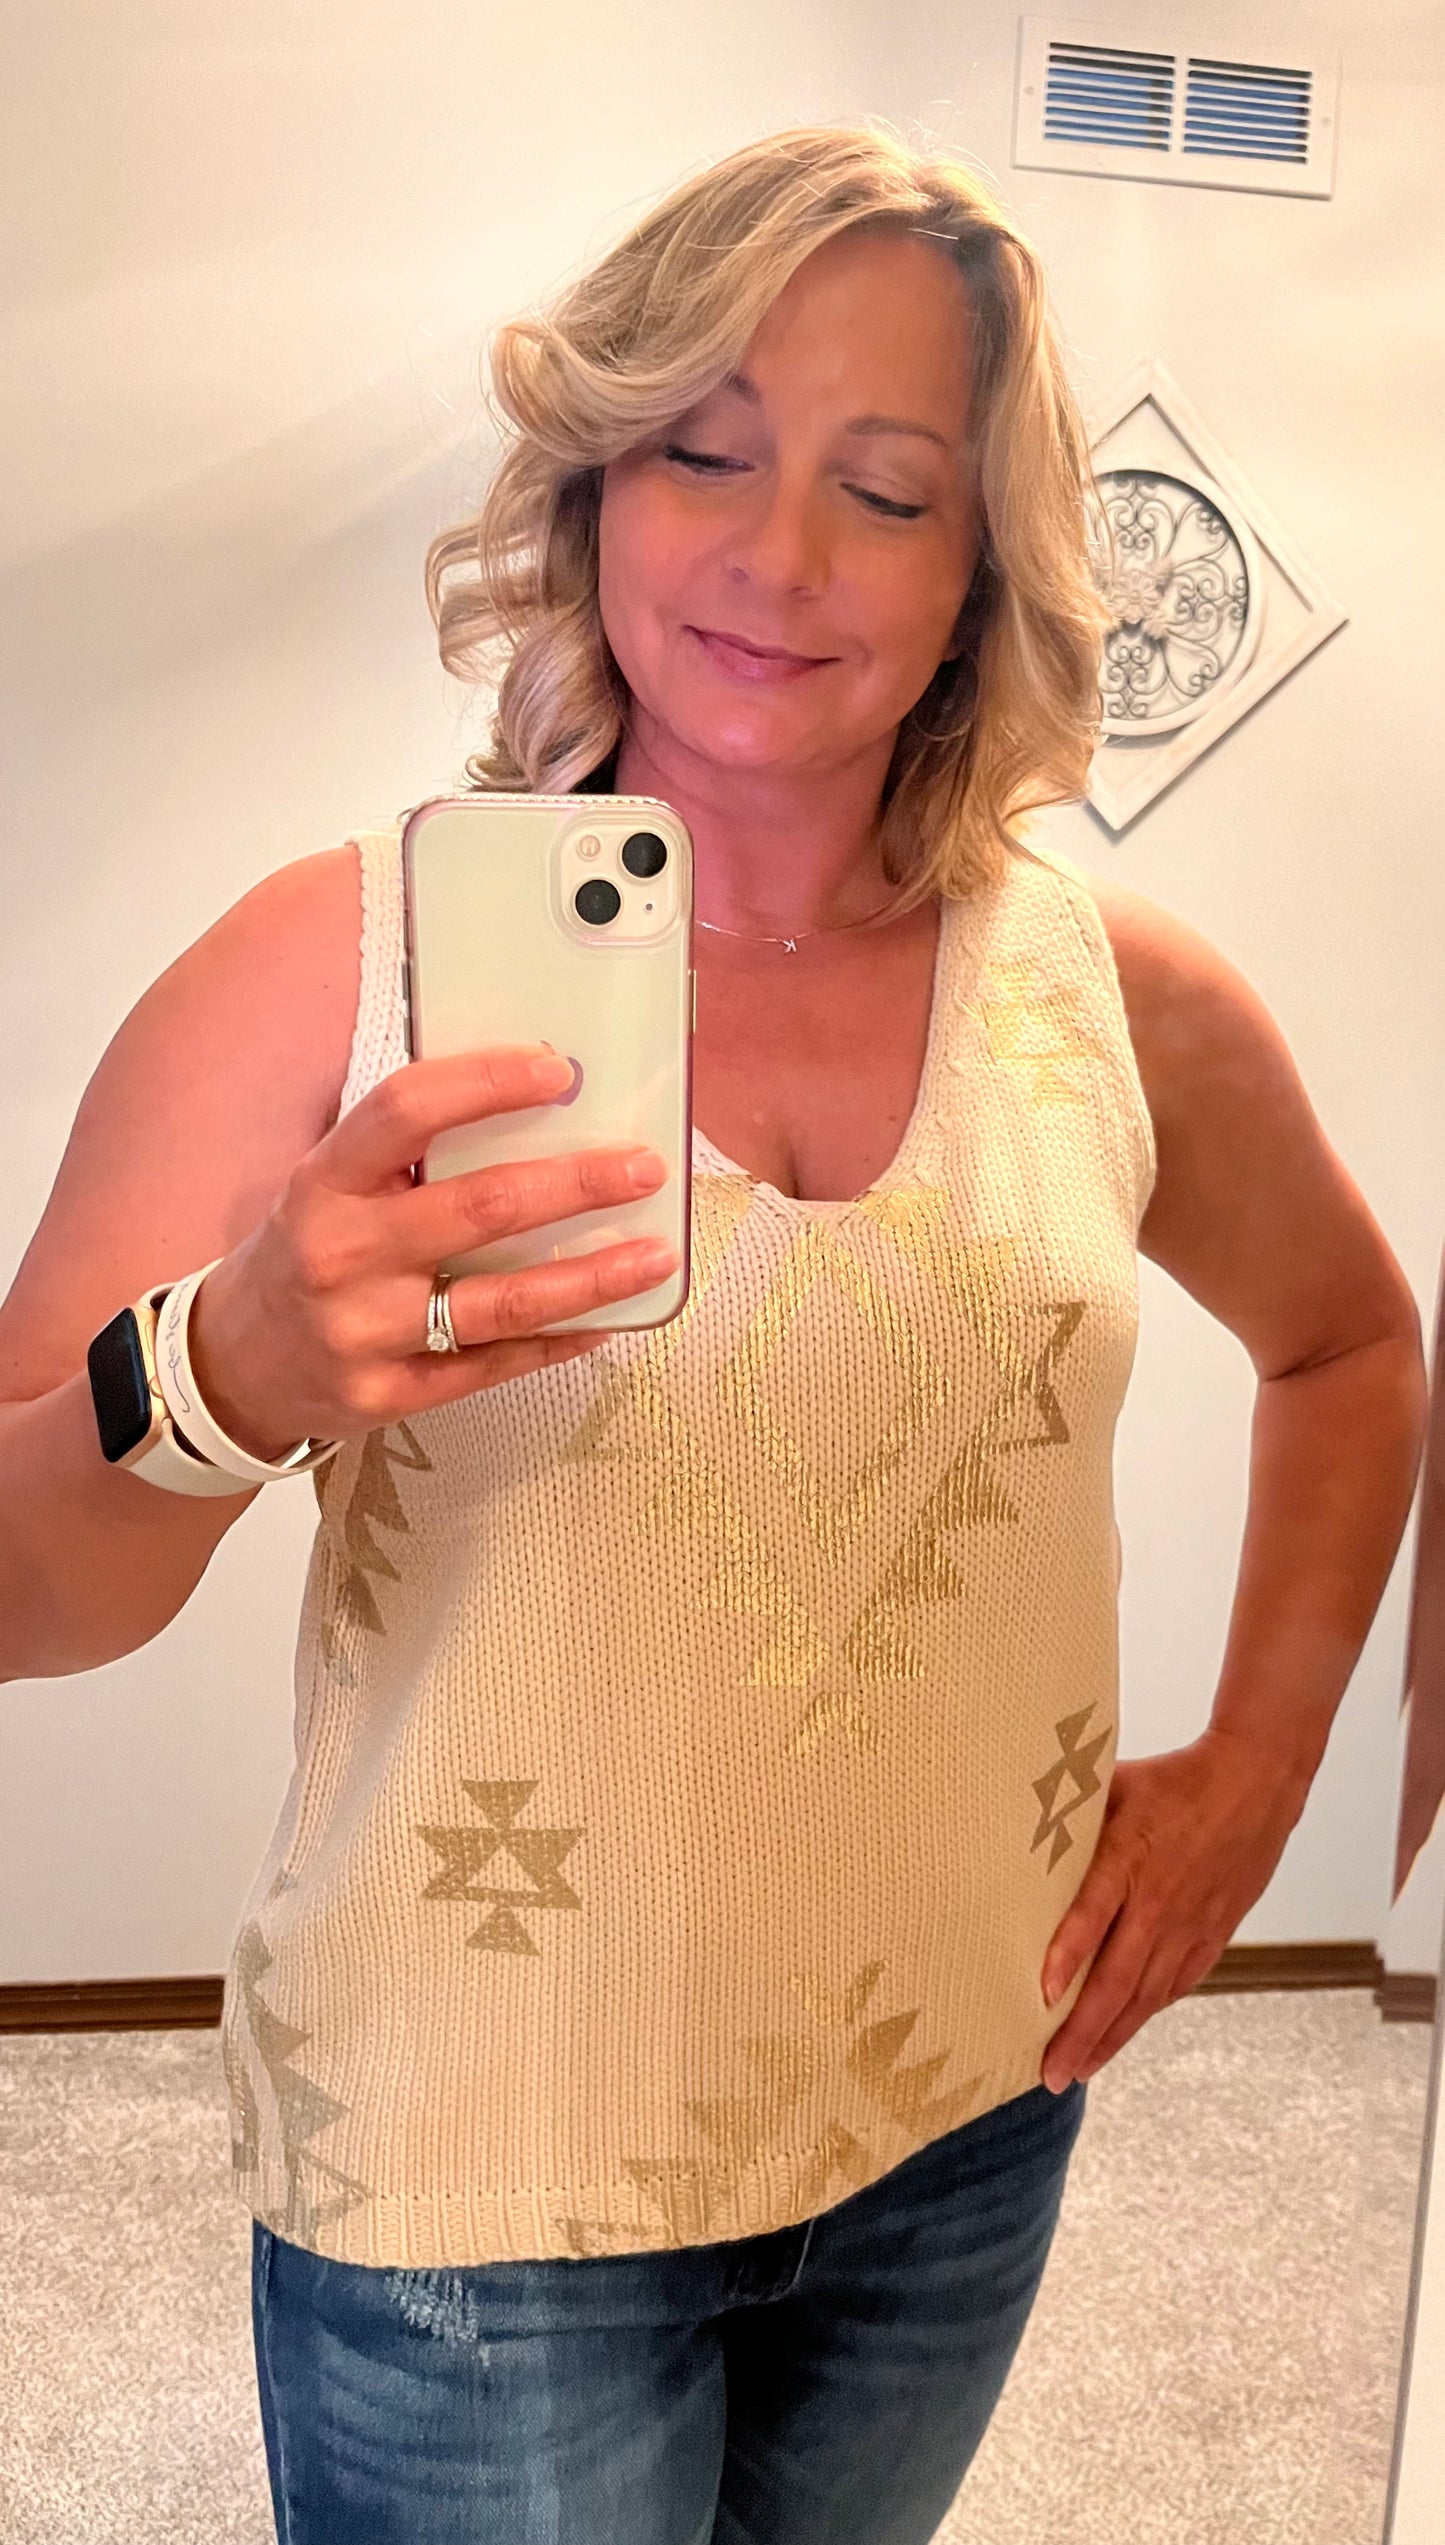 Lt.Taupe Gold Aztec Printed V neck Sleeveless Knitted Top